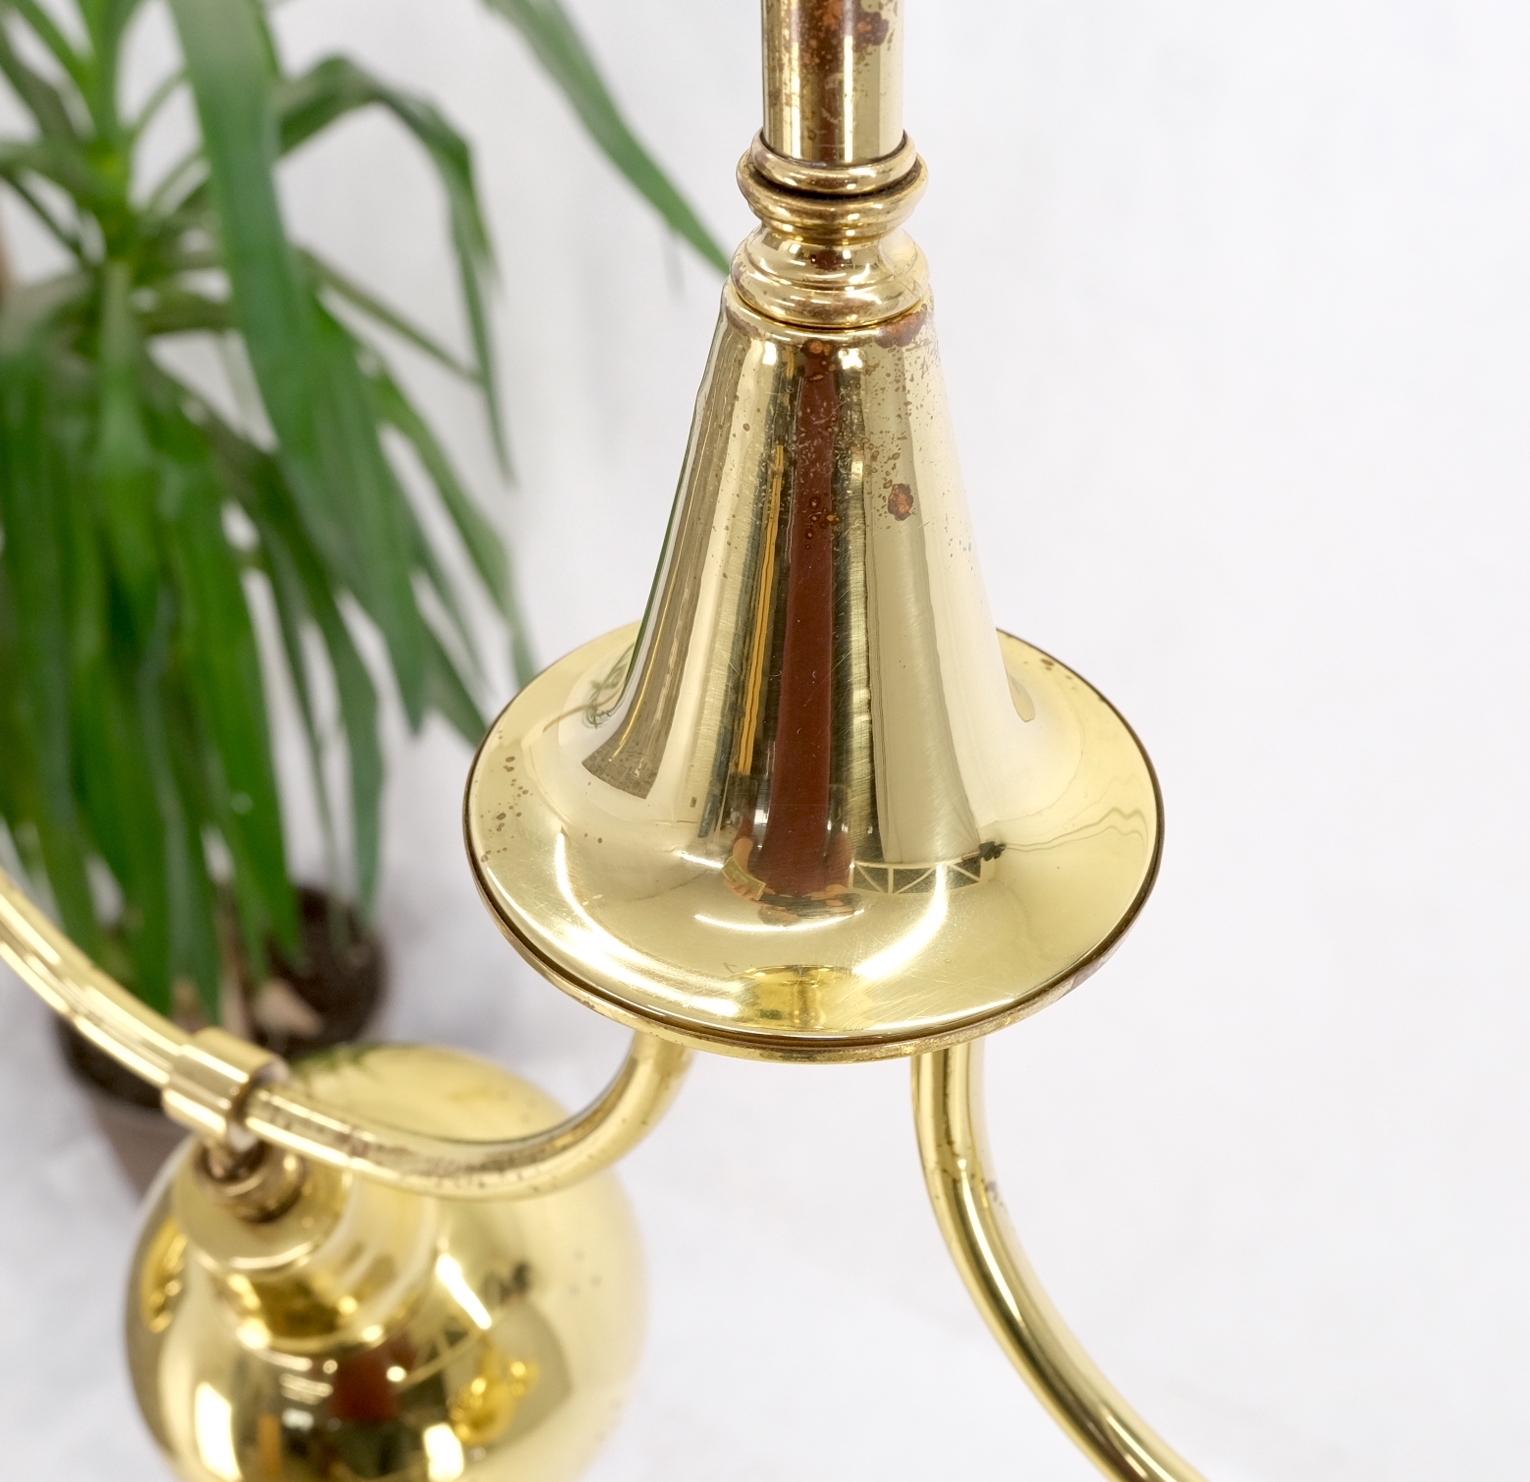 Solid Polished Brass Ball Pear Shape Shades Light Bar Pool Table Fixture Chandel In Good Condition For Sale In Rockaway, NJ